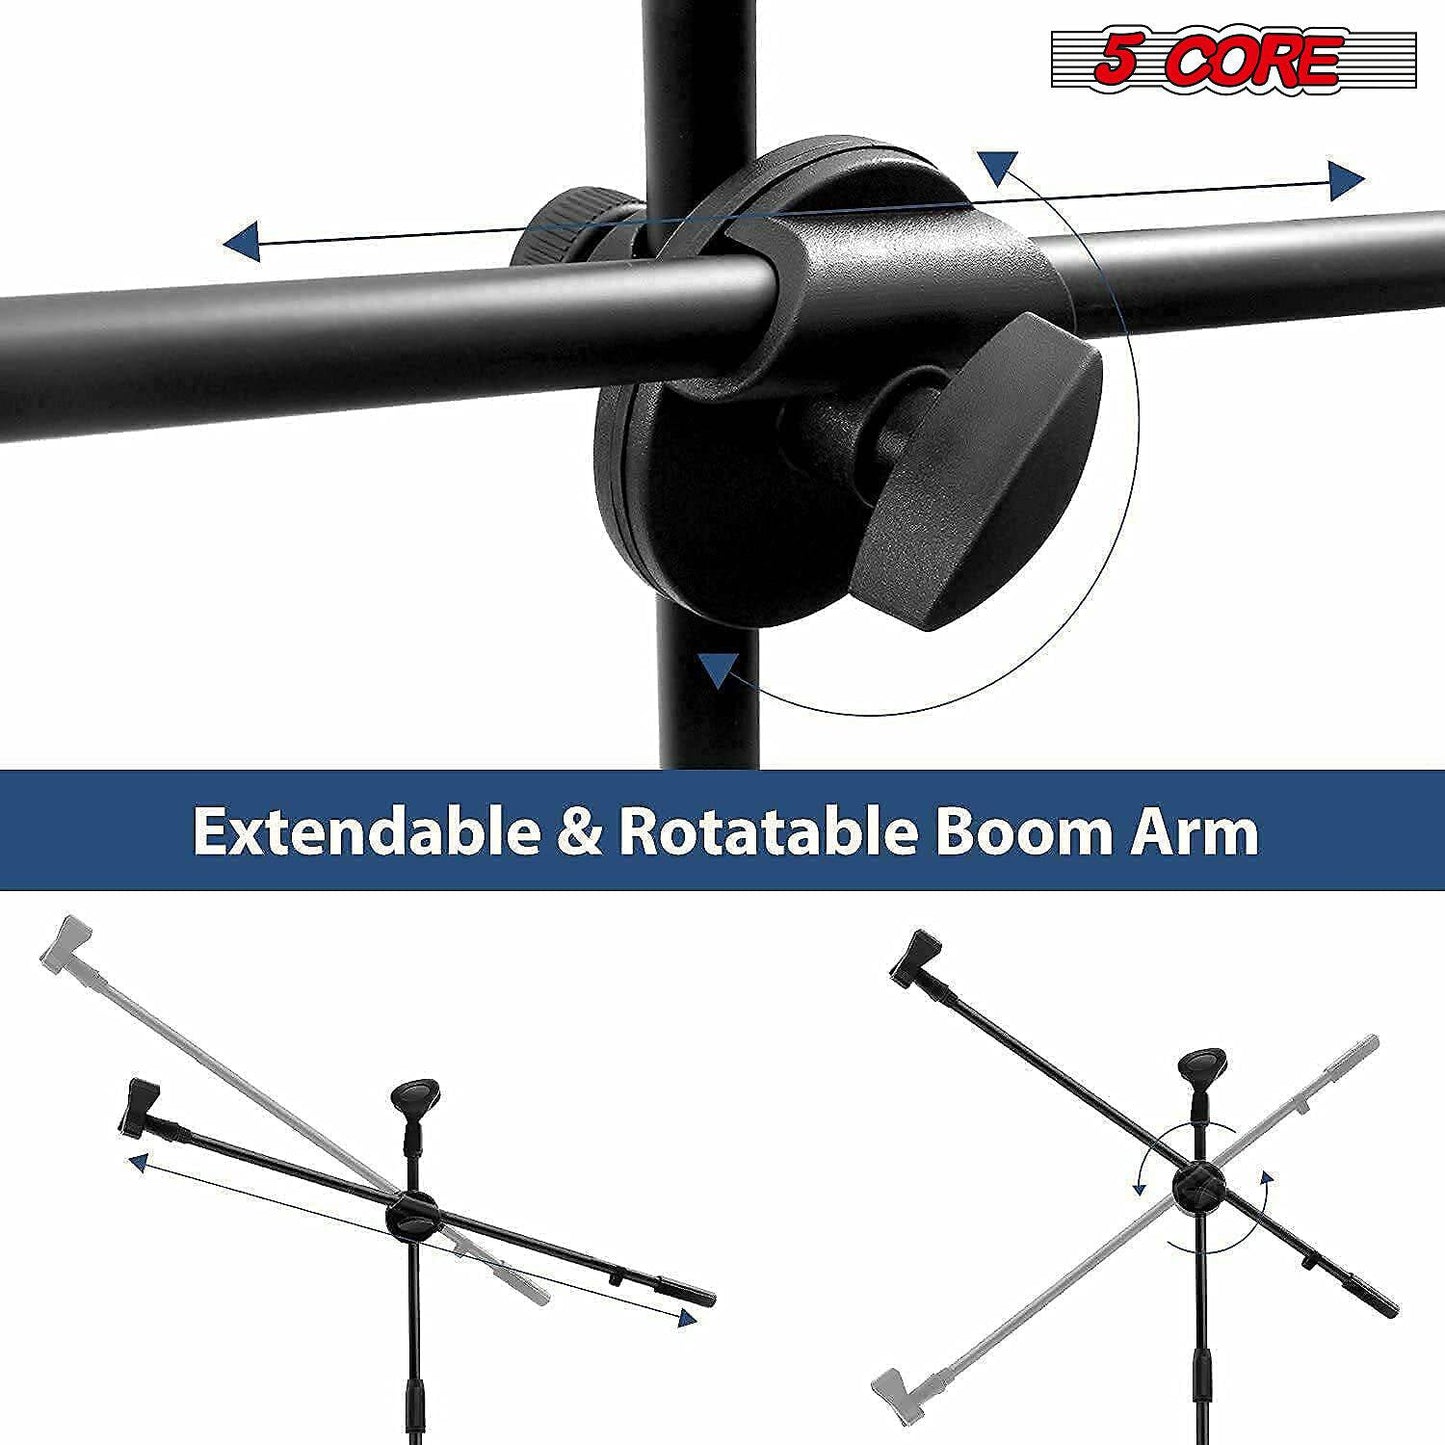 5 Core Dual Microphone Stand, Foldable Tripod Boom Stand | EastTone® - Stringspeed